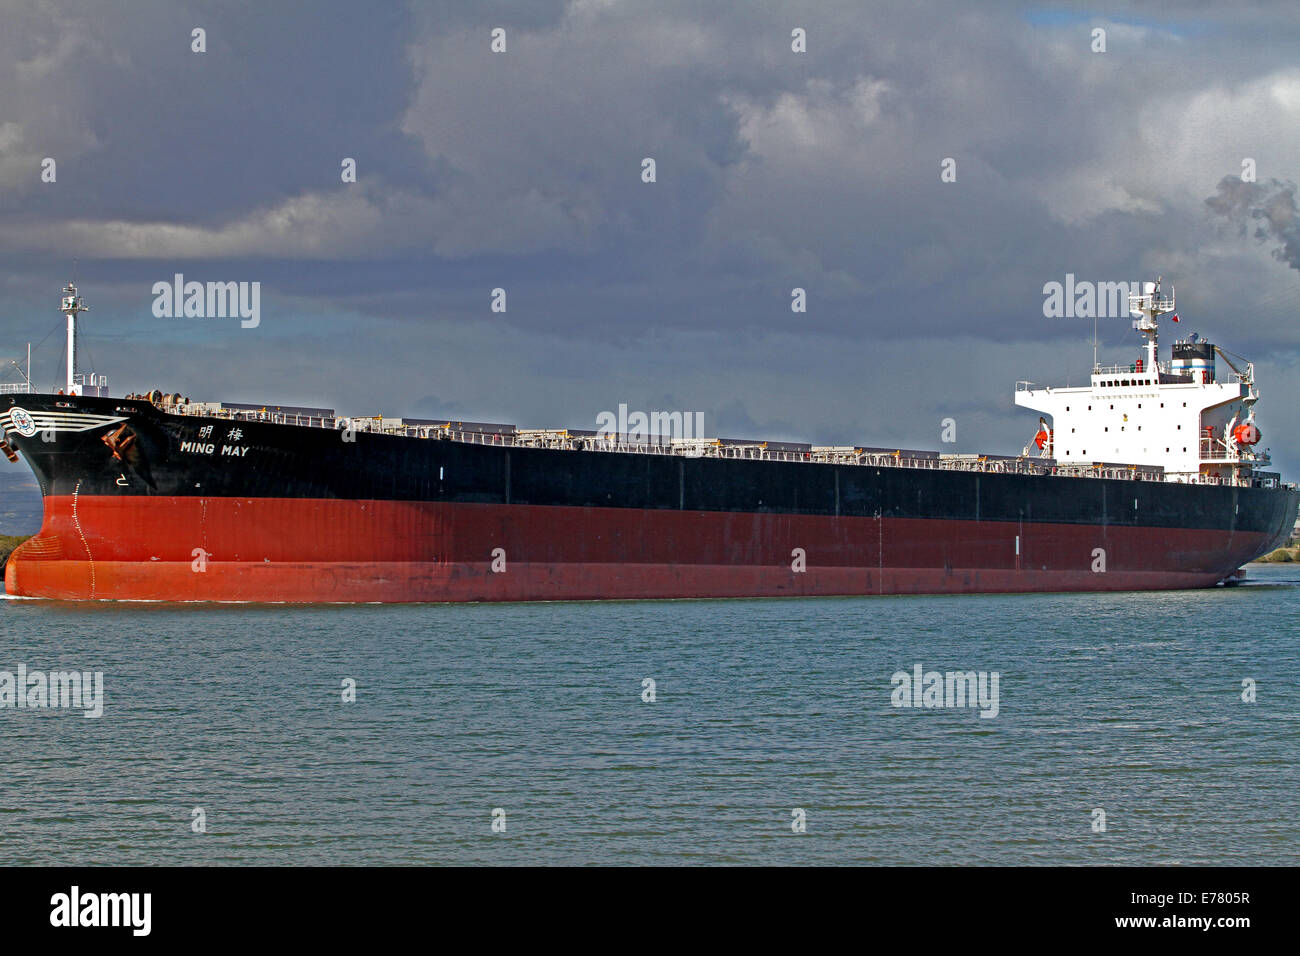 The Ming May sailing into harbour in Adelaide Australia Stock Photo